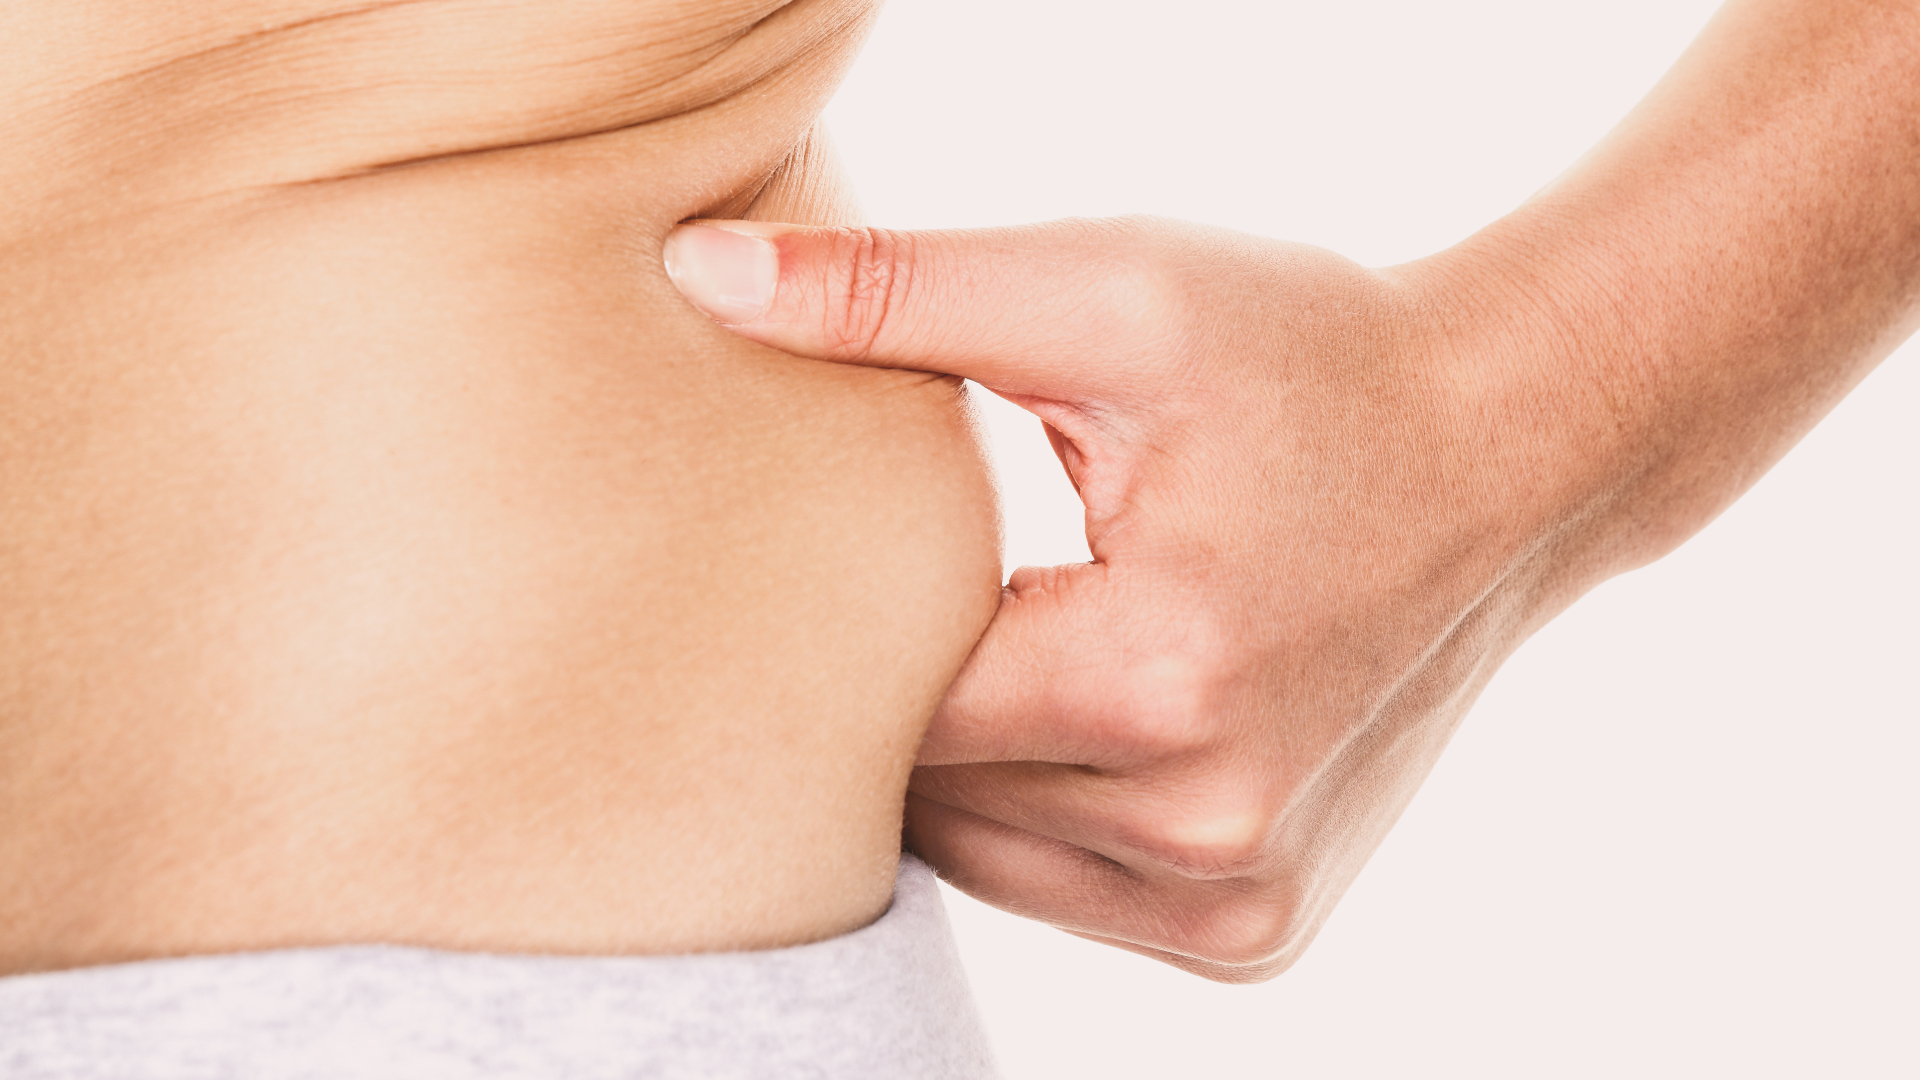 Can Tummy Tuck Surgery Get Rid of My Love Handles?